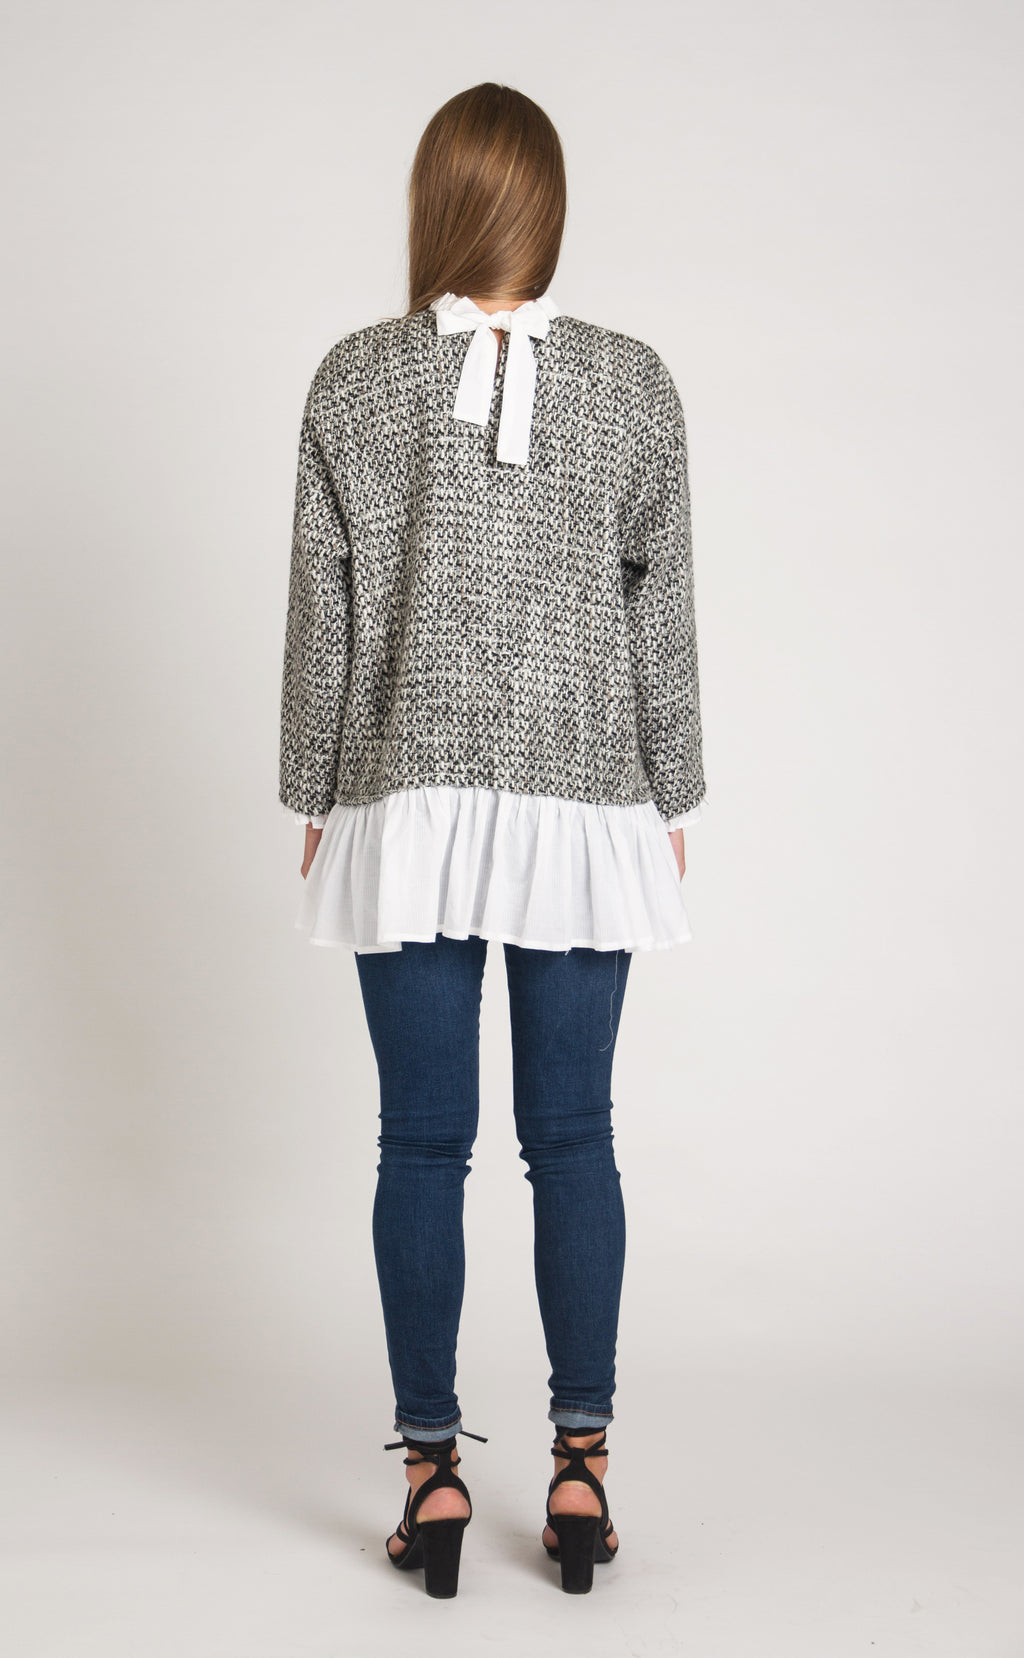 Woven Top with Sleeve and Hem Flounce